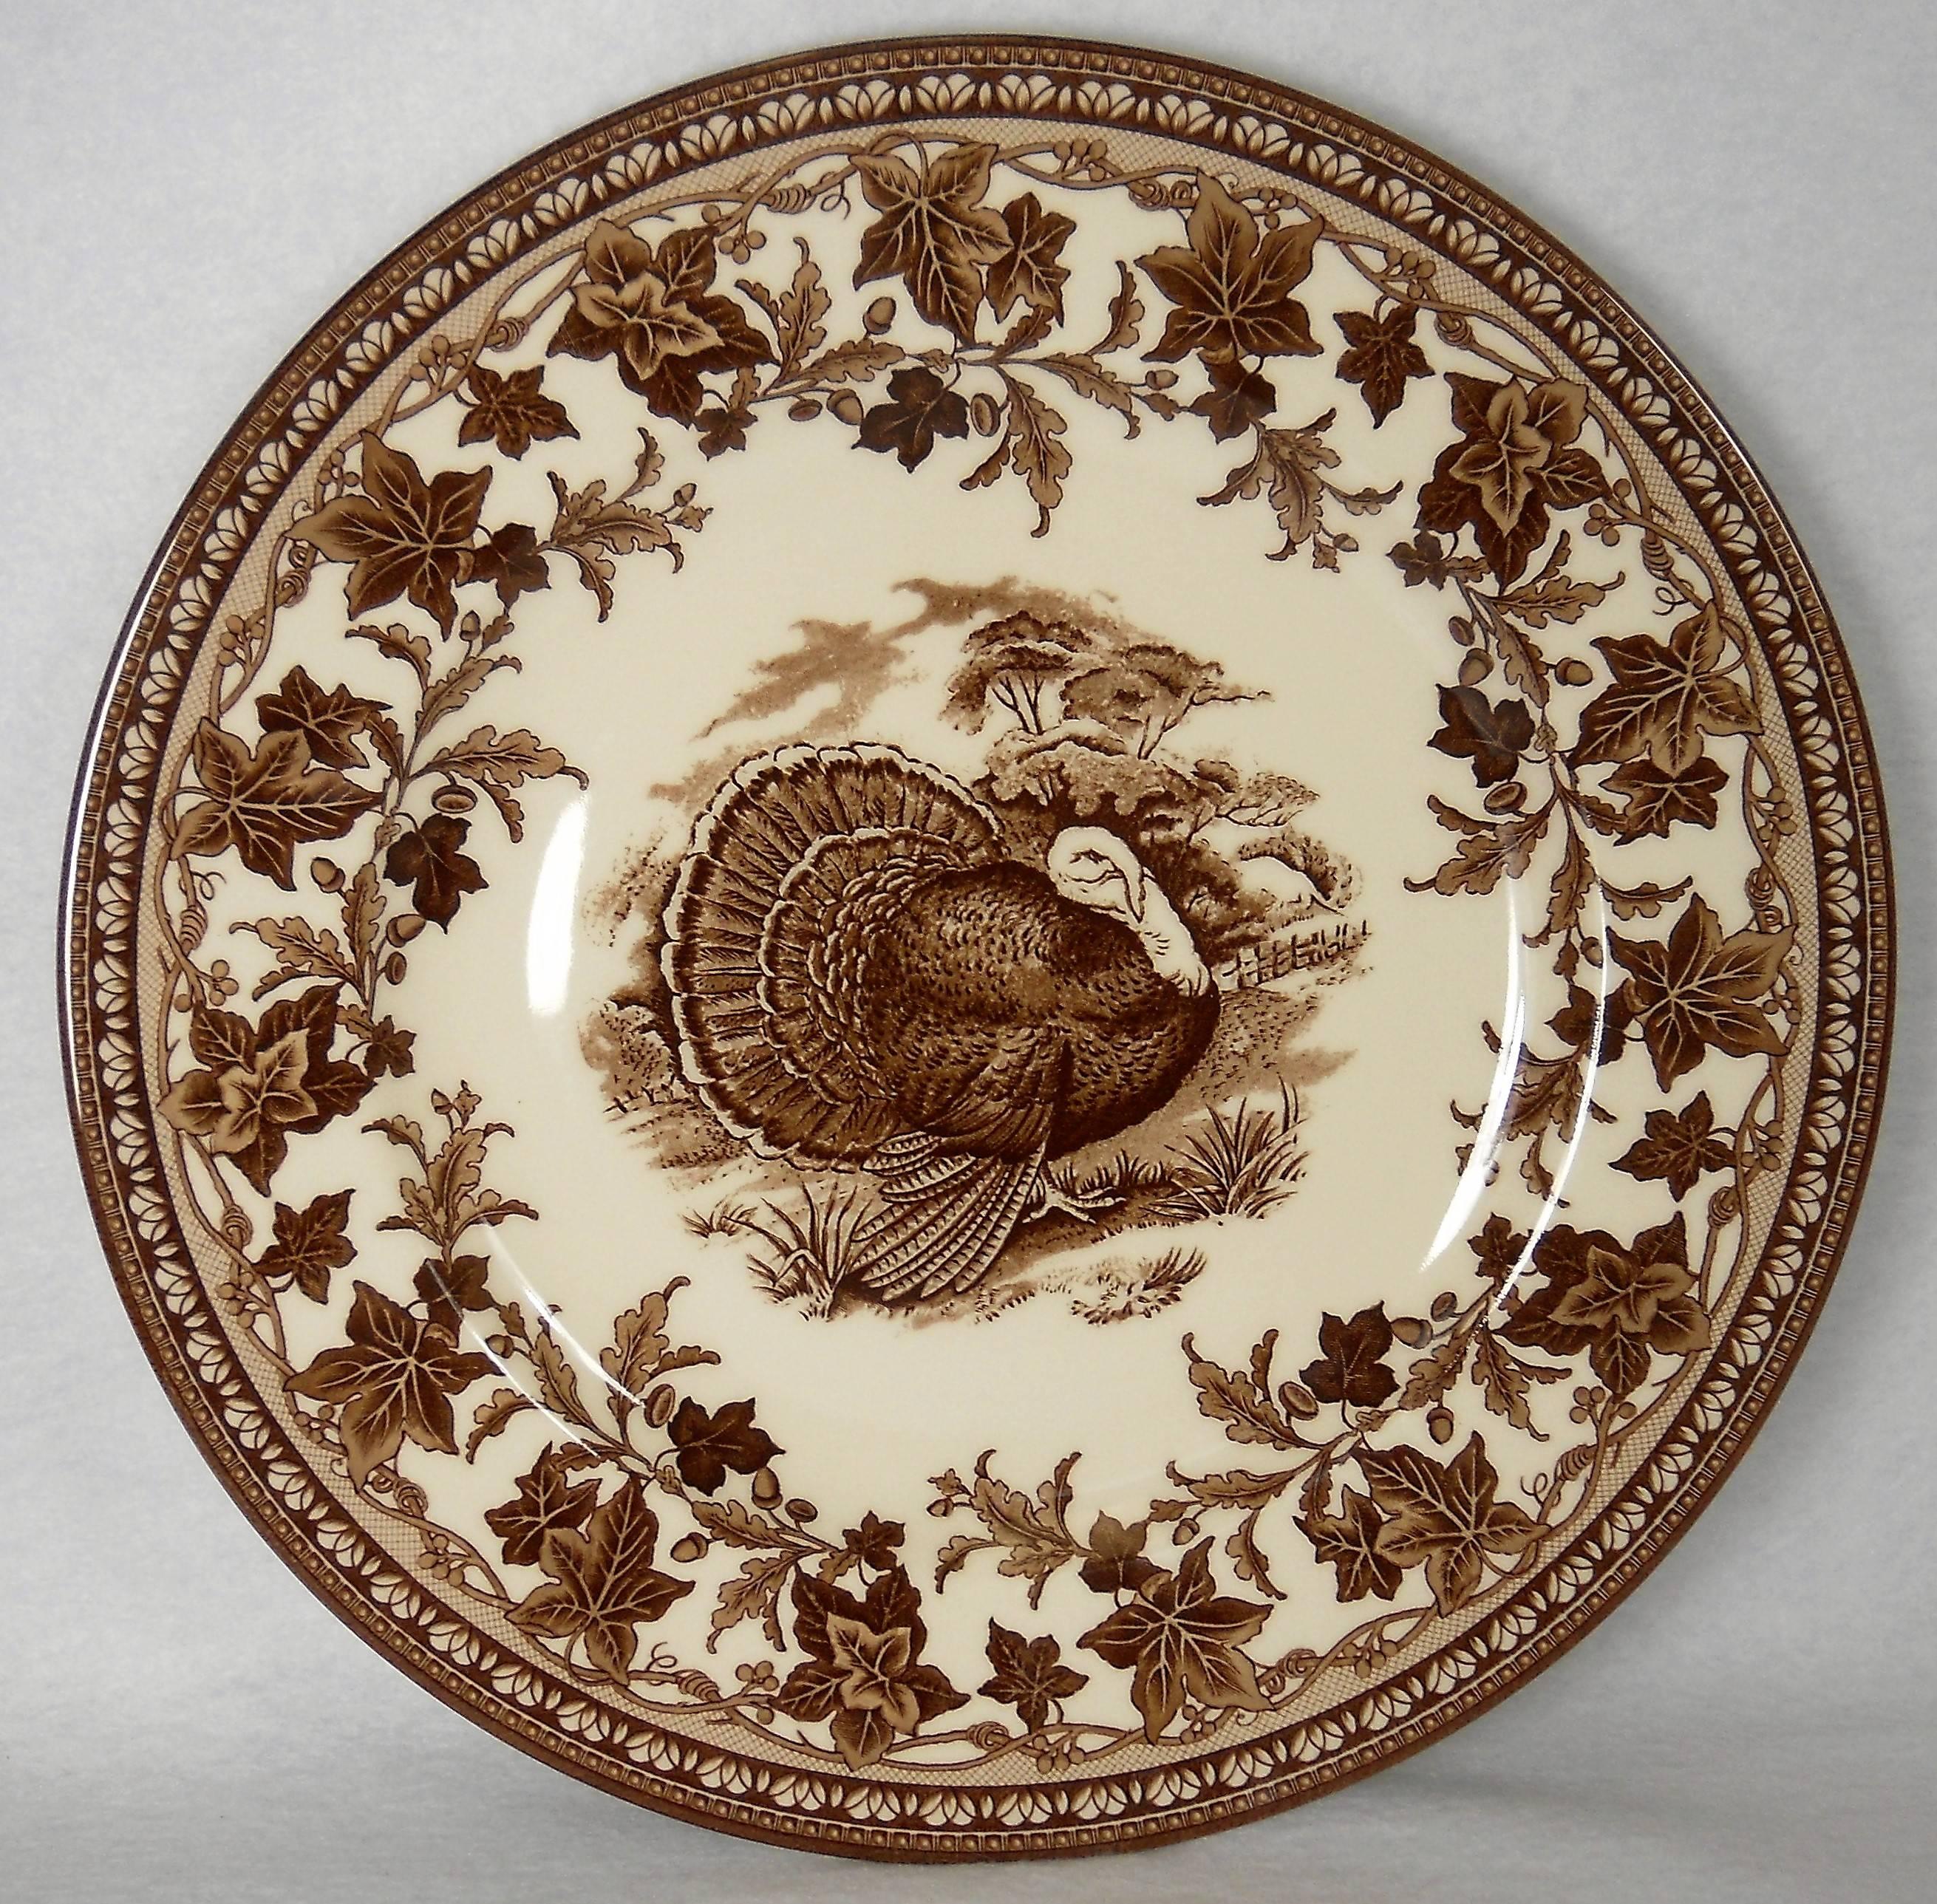 Wedgwood for Williams-Sonoma HIS MAJESTY pattern Dinner Plate